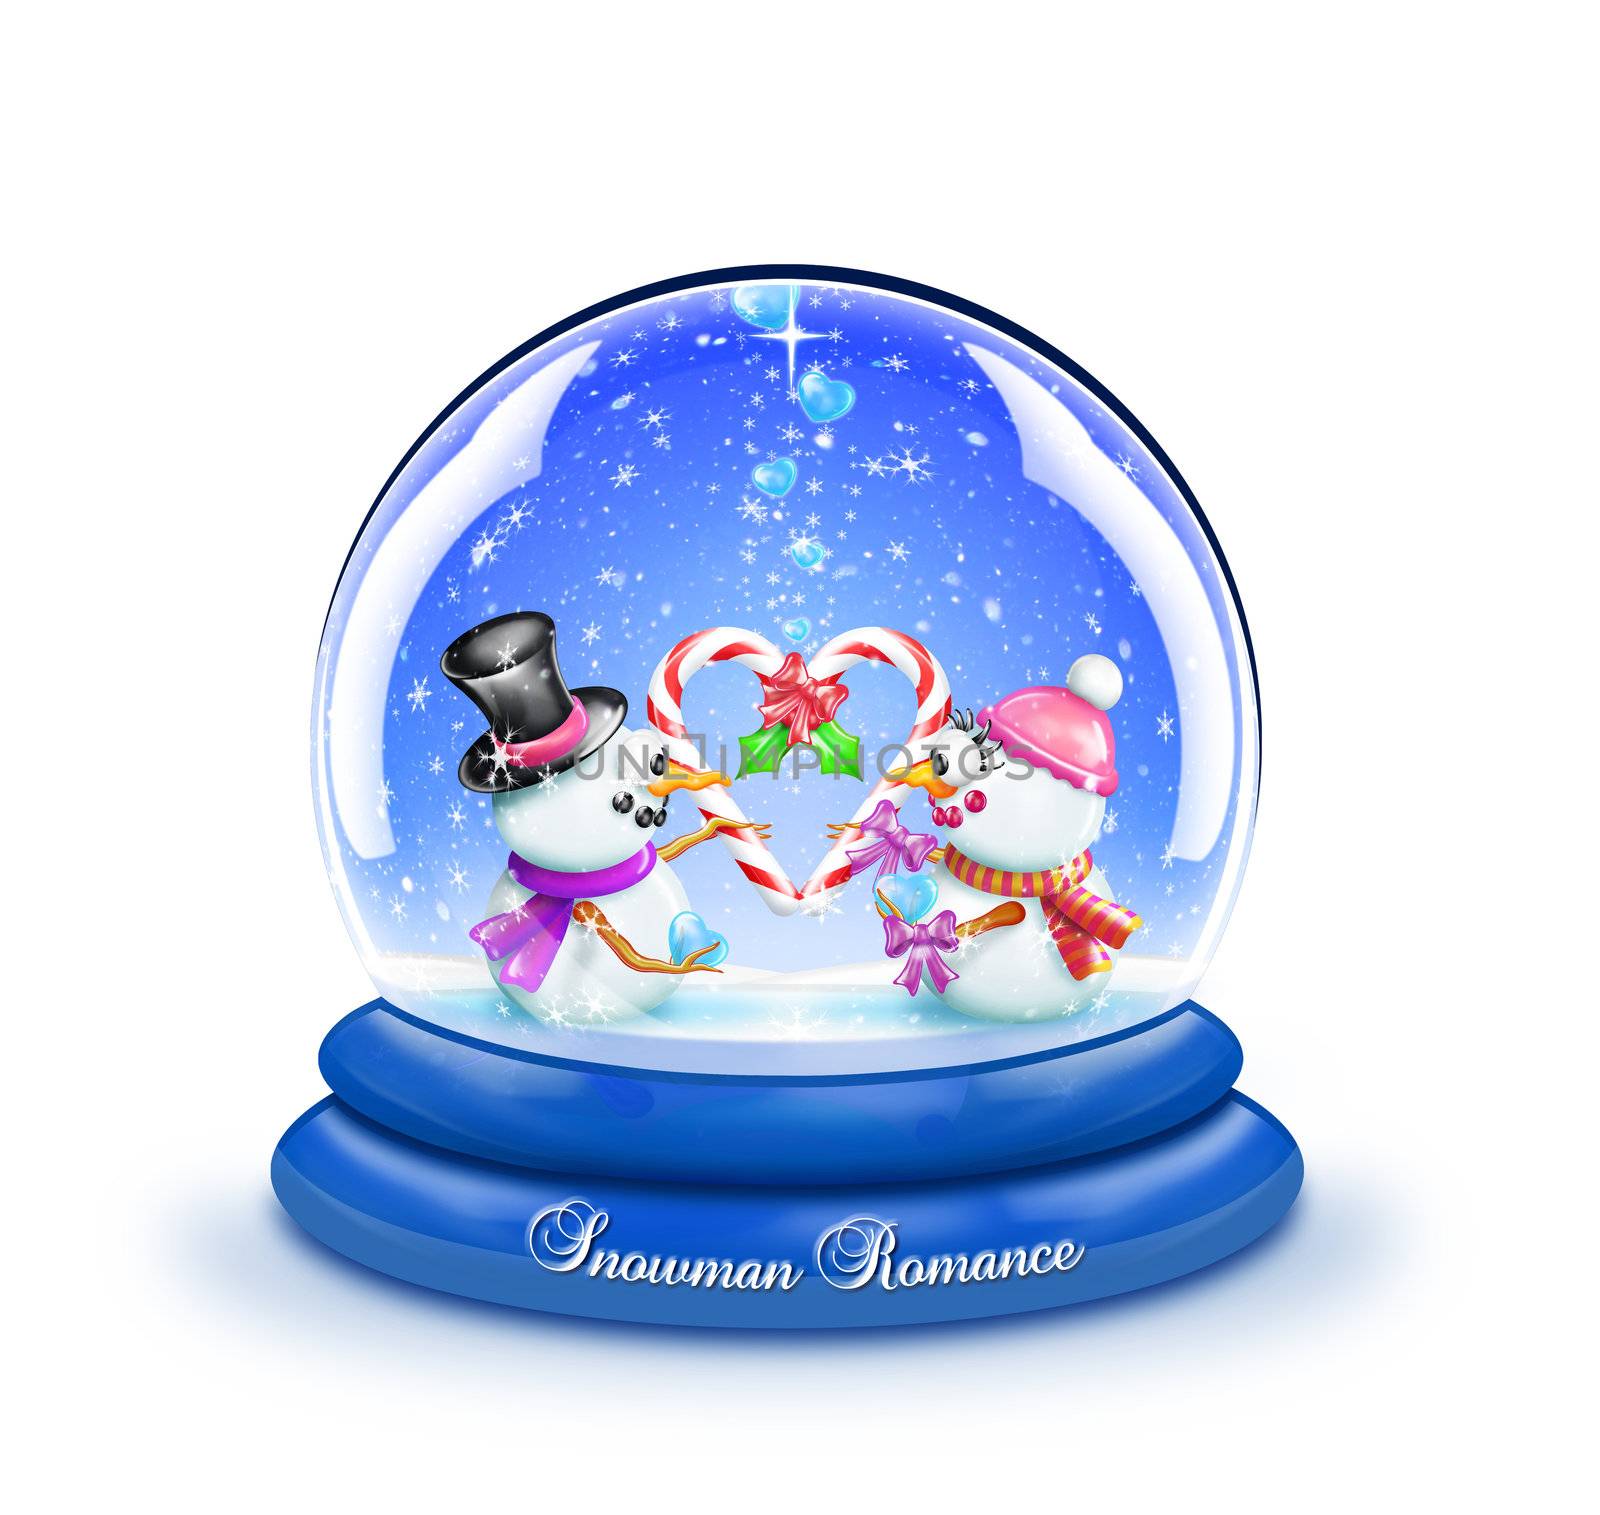 A snow globe with two snowmen holding candy canes in the shape of a heart.